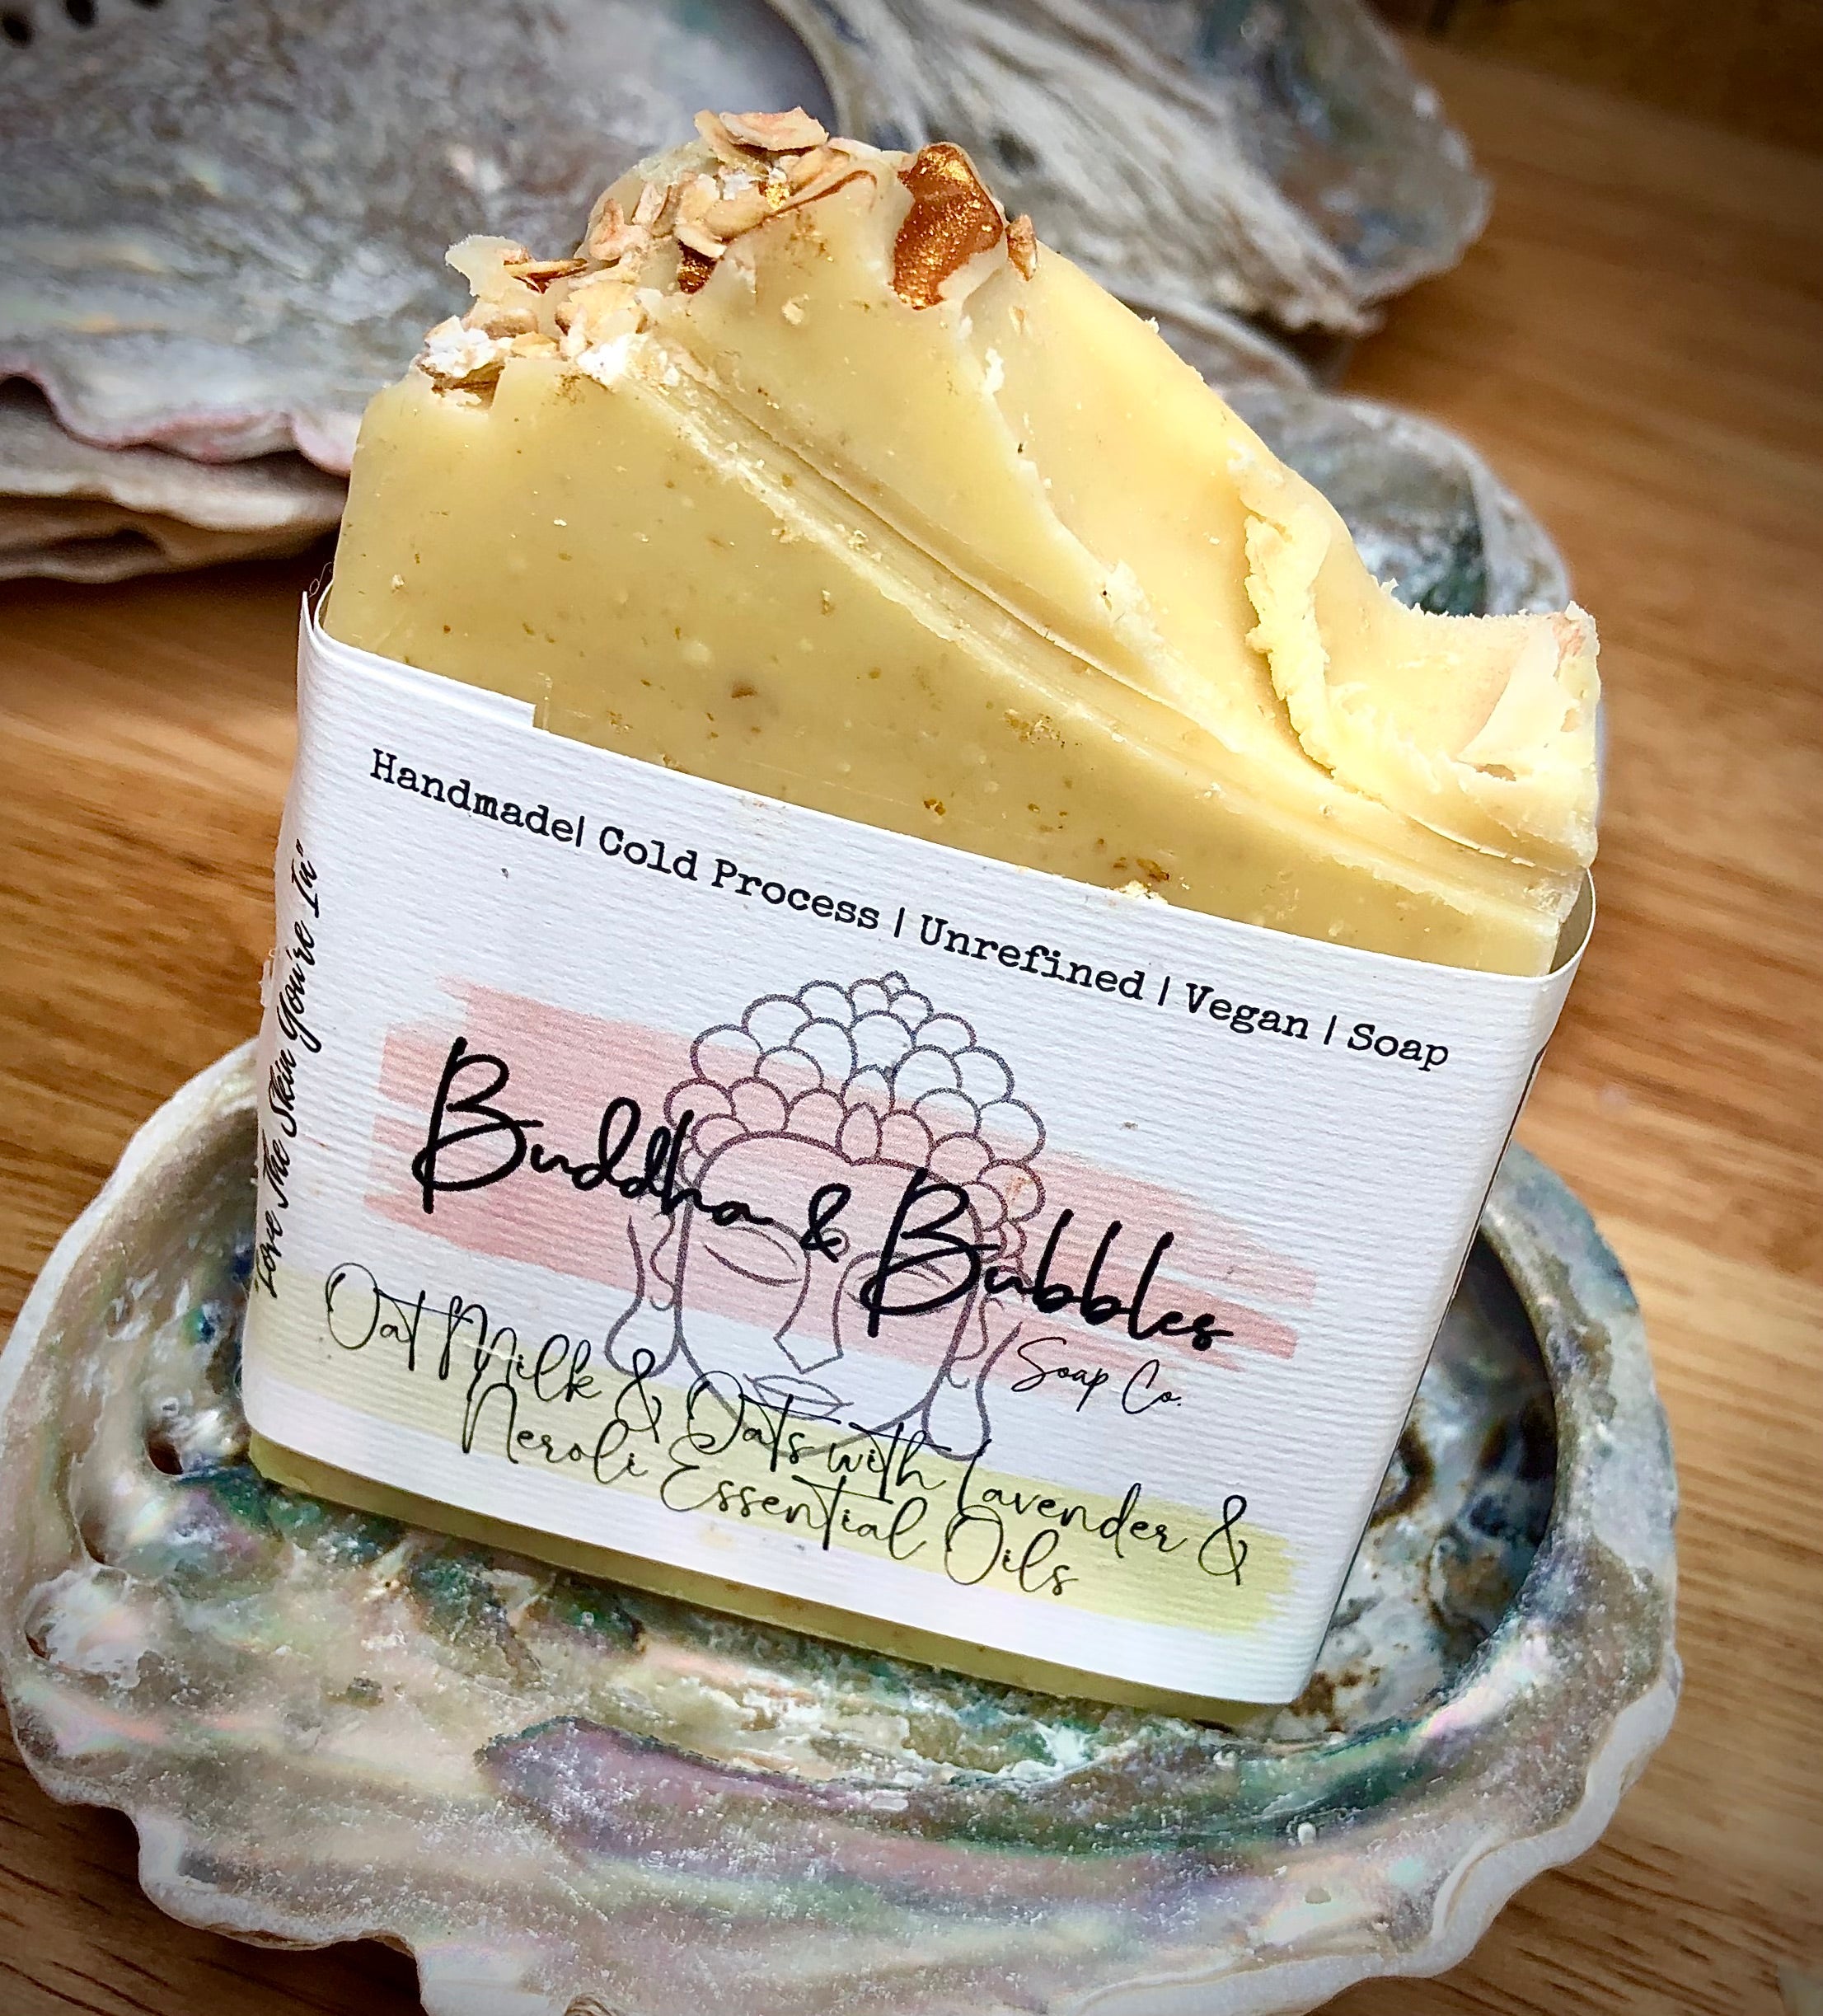 Handmade Oat Milk & Oats Cold Process Soap with Lavender & Neroli Essential oil